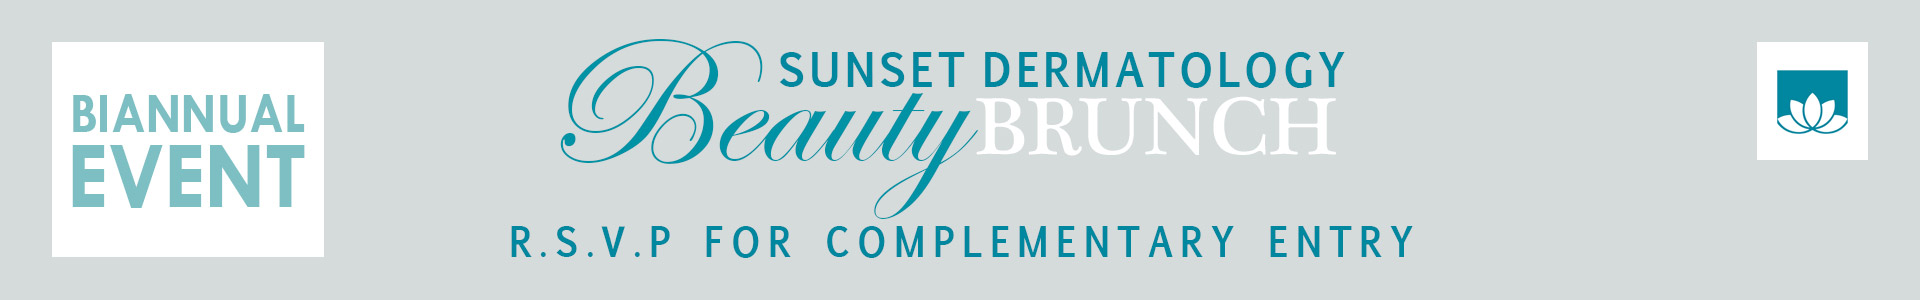 Join Sunset Dermatology's Beauty Brunch in South Miami, Florida.